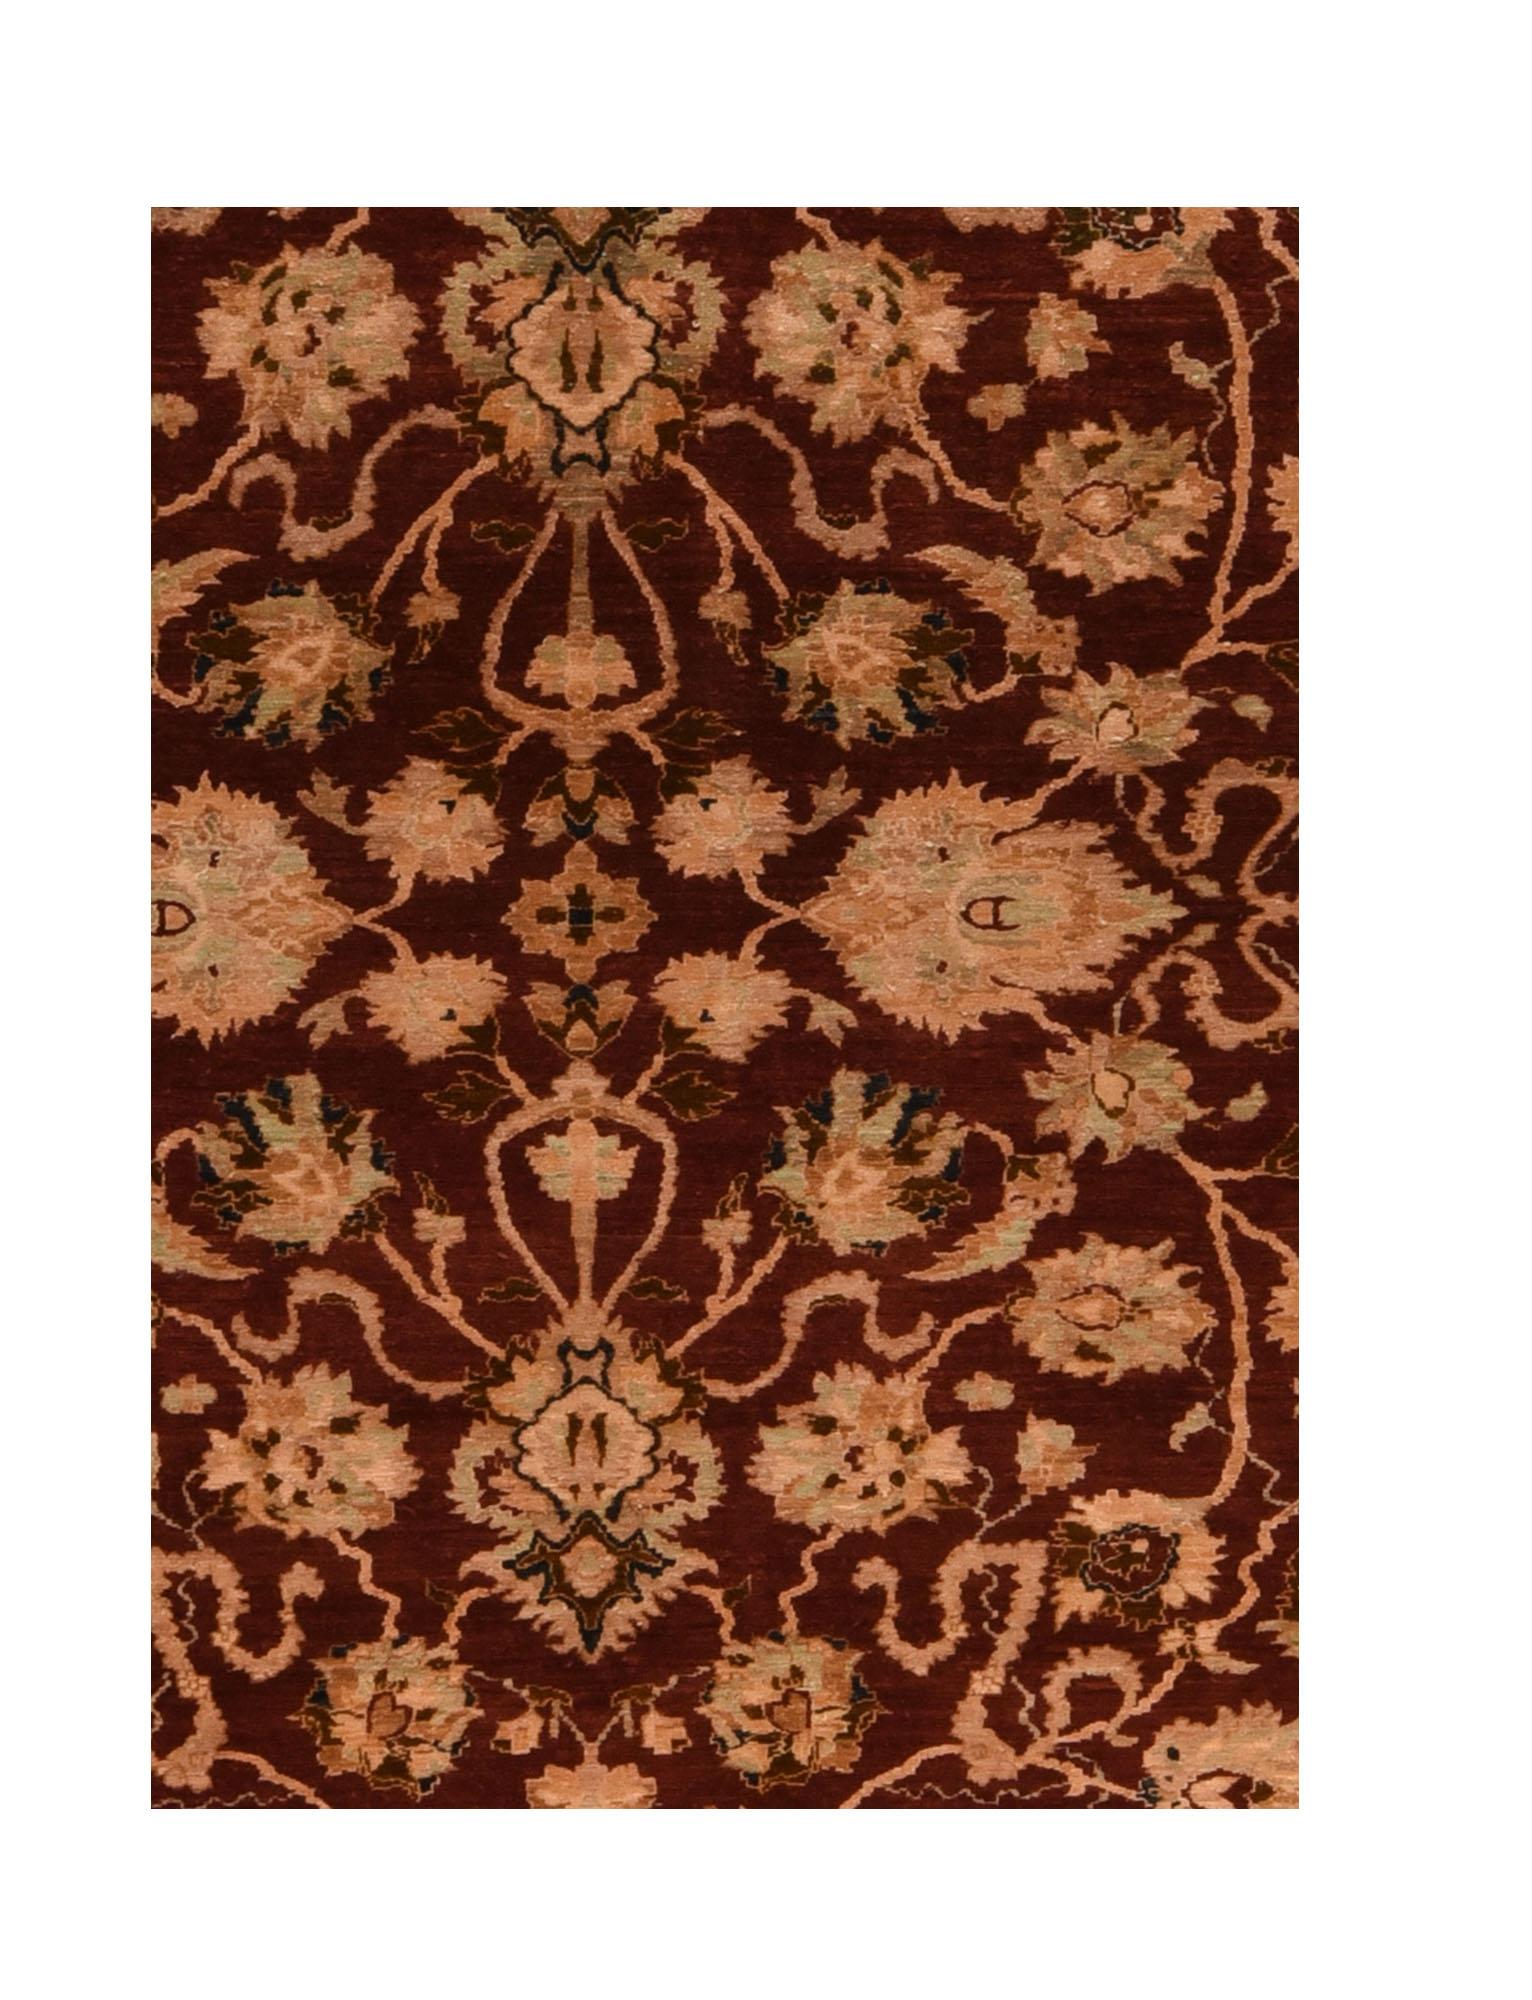 A Pakistani rug (Pak Persian Rug or Pakistani carpet) is a type of handmade floor-covering textile traditionally made in Pakistan.

Chobi often referred as Ziegler, Oushak or Peshawar, Chobi rugs employ handspun wool and natural dyes. Floral